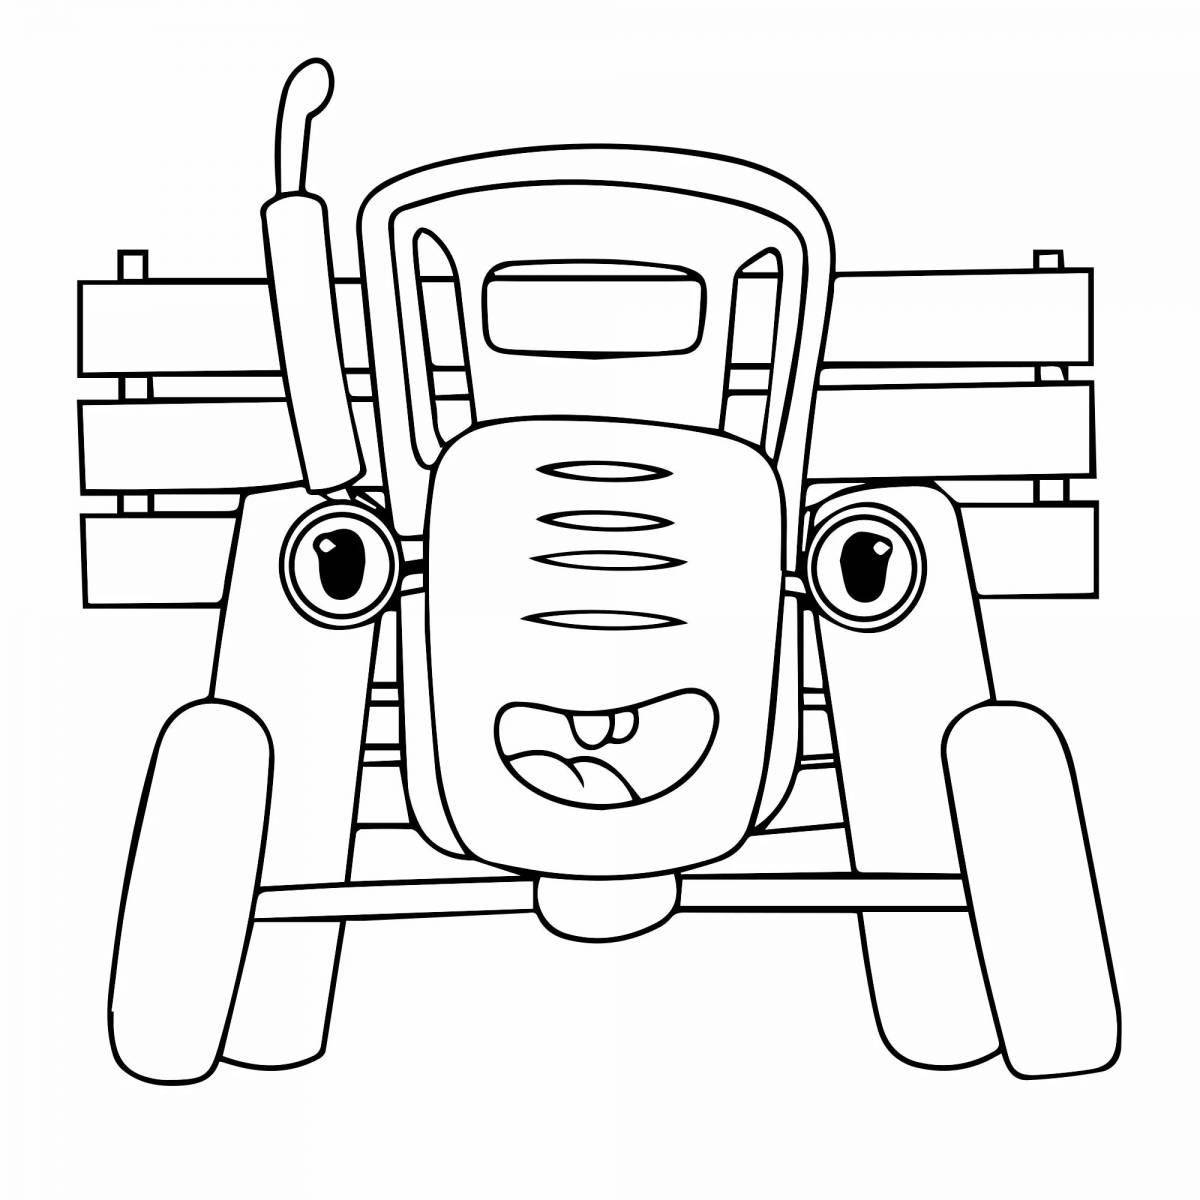 Coloring page bright blue tractor animals